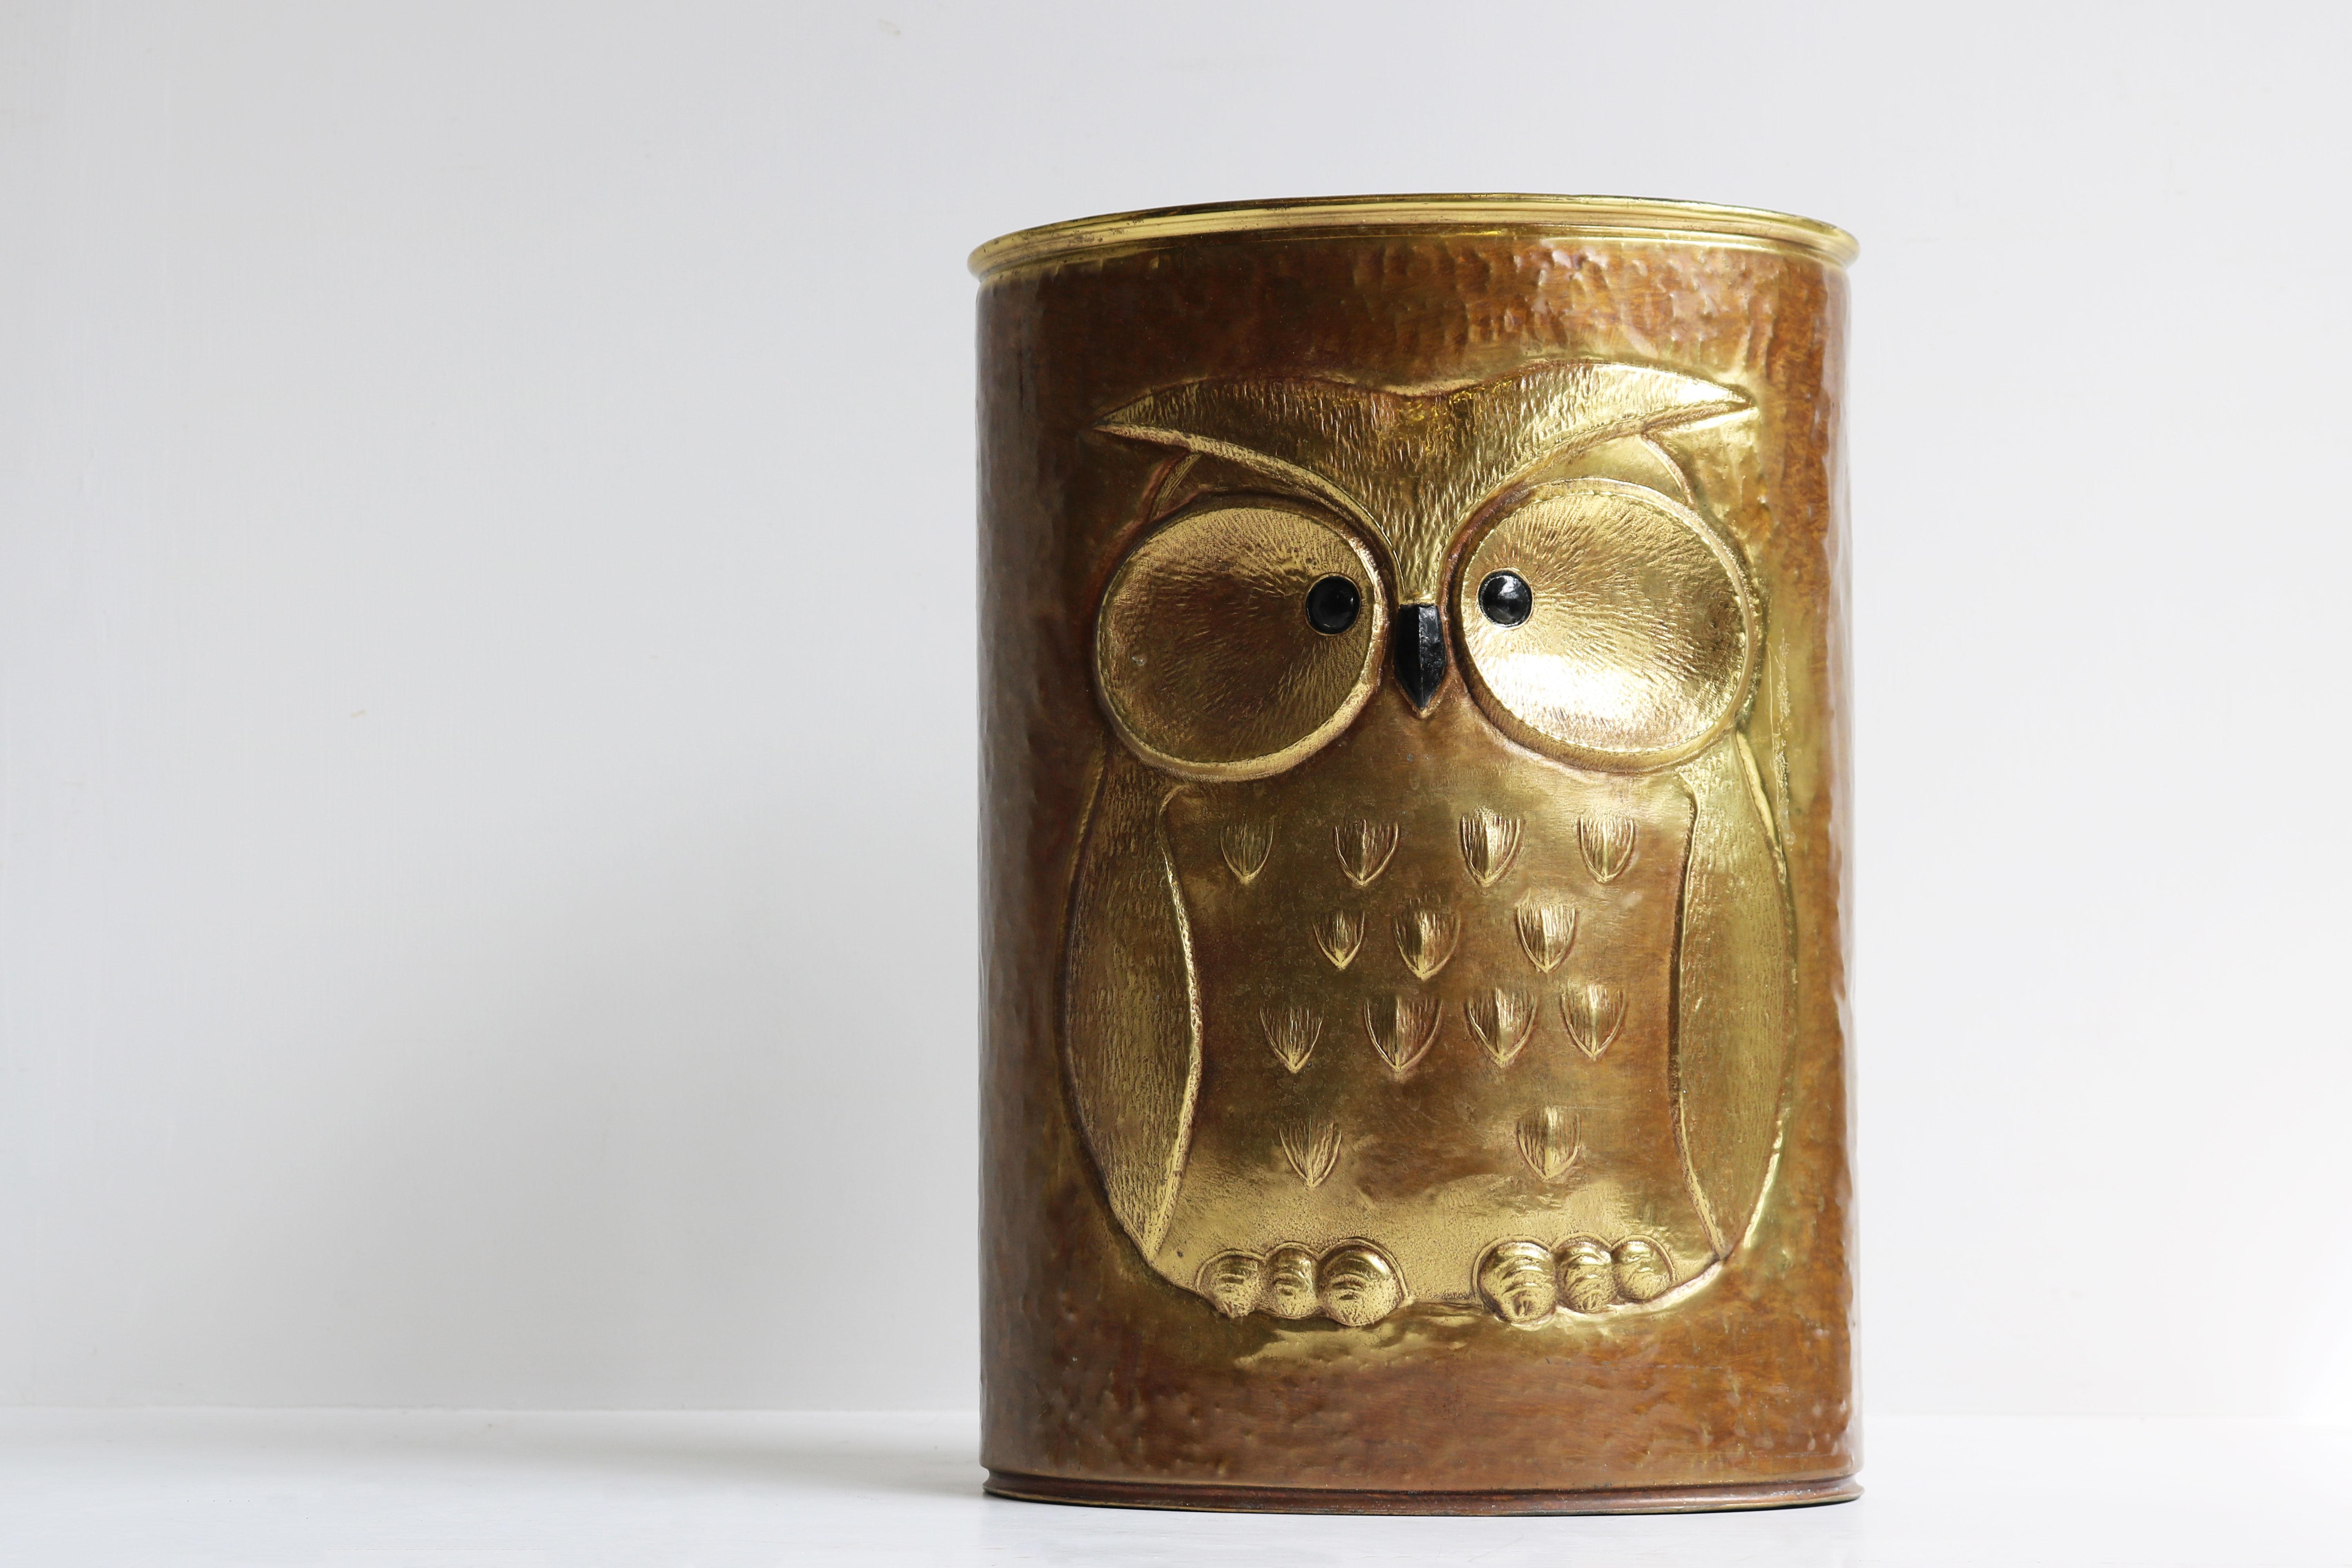 Stunning craftsmanship this handmade hammered brass umbrella stand model ''Owl'' by quality factory Micap Belgium 1960. 
Micap specialized in handmade copper and brass products and this marvelous fully handmade umbrella stand is a perfect example